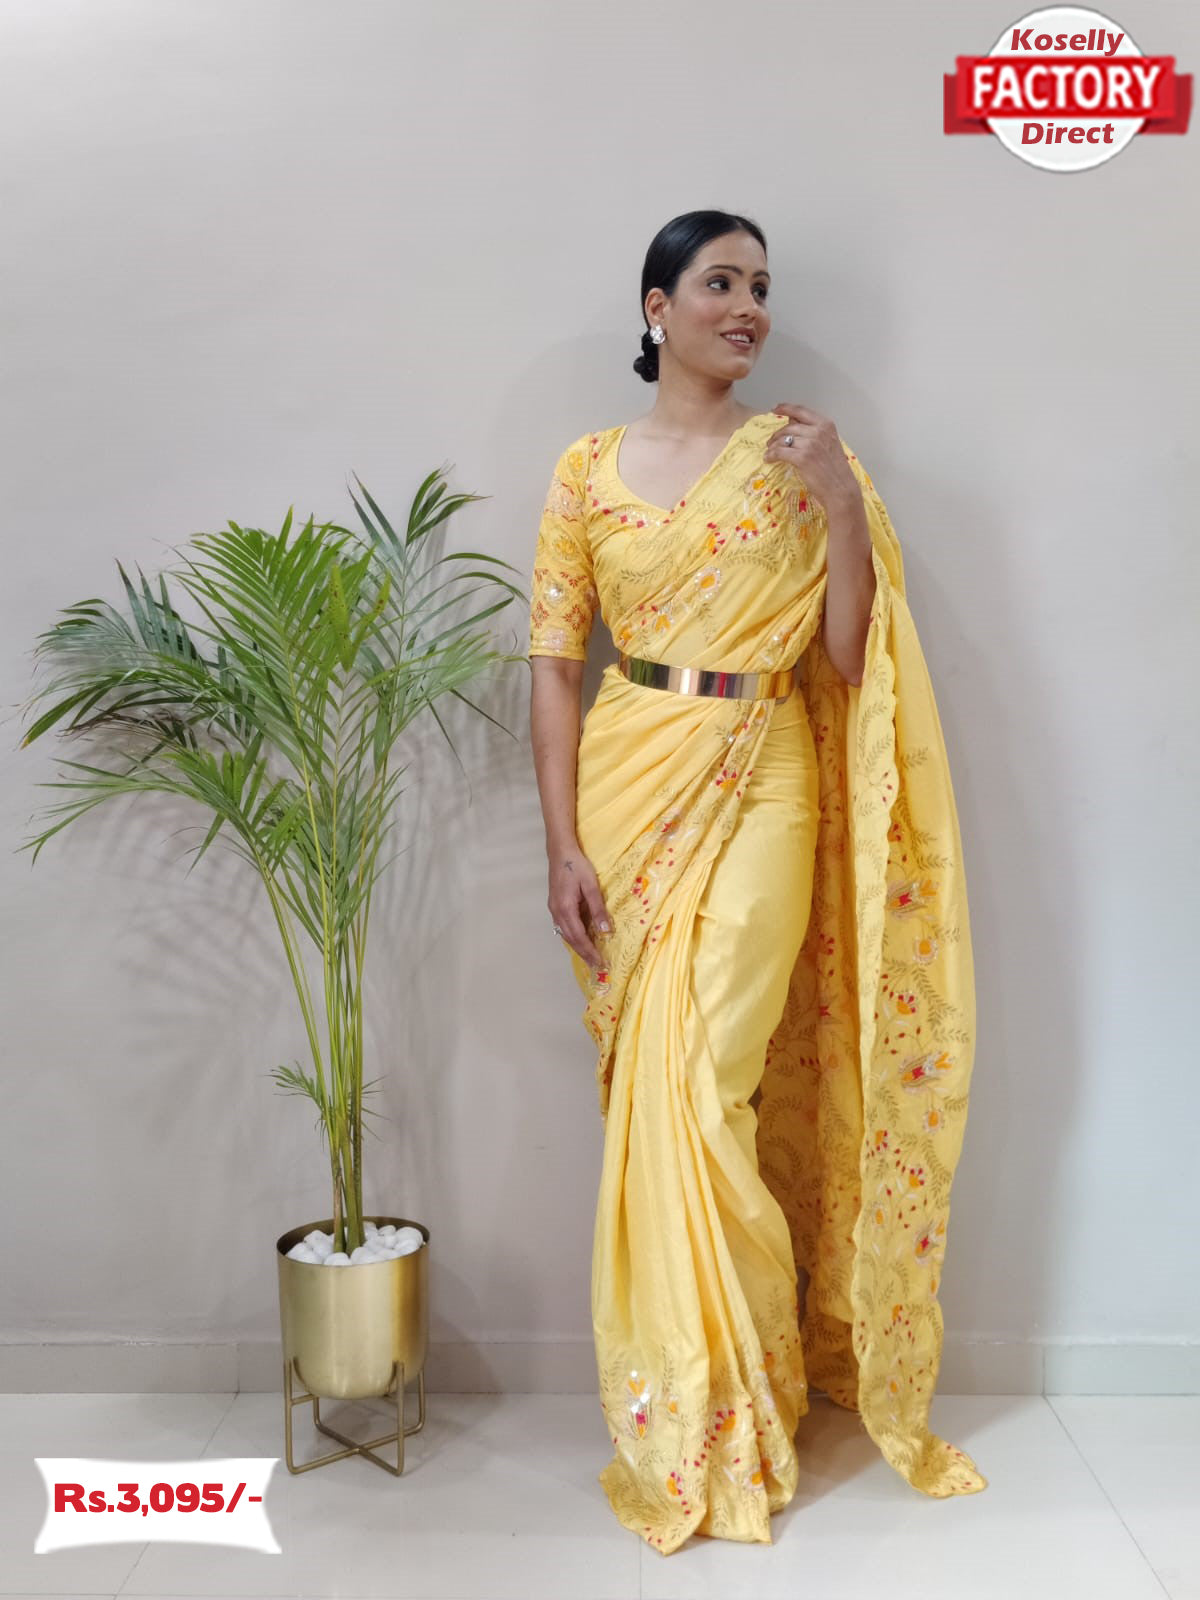 Embroidered Border Saree Set Styled With Belt